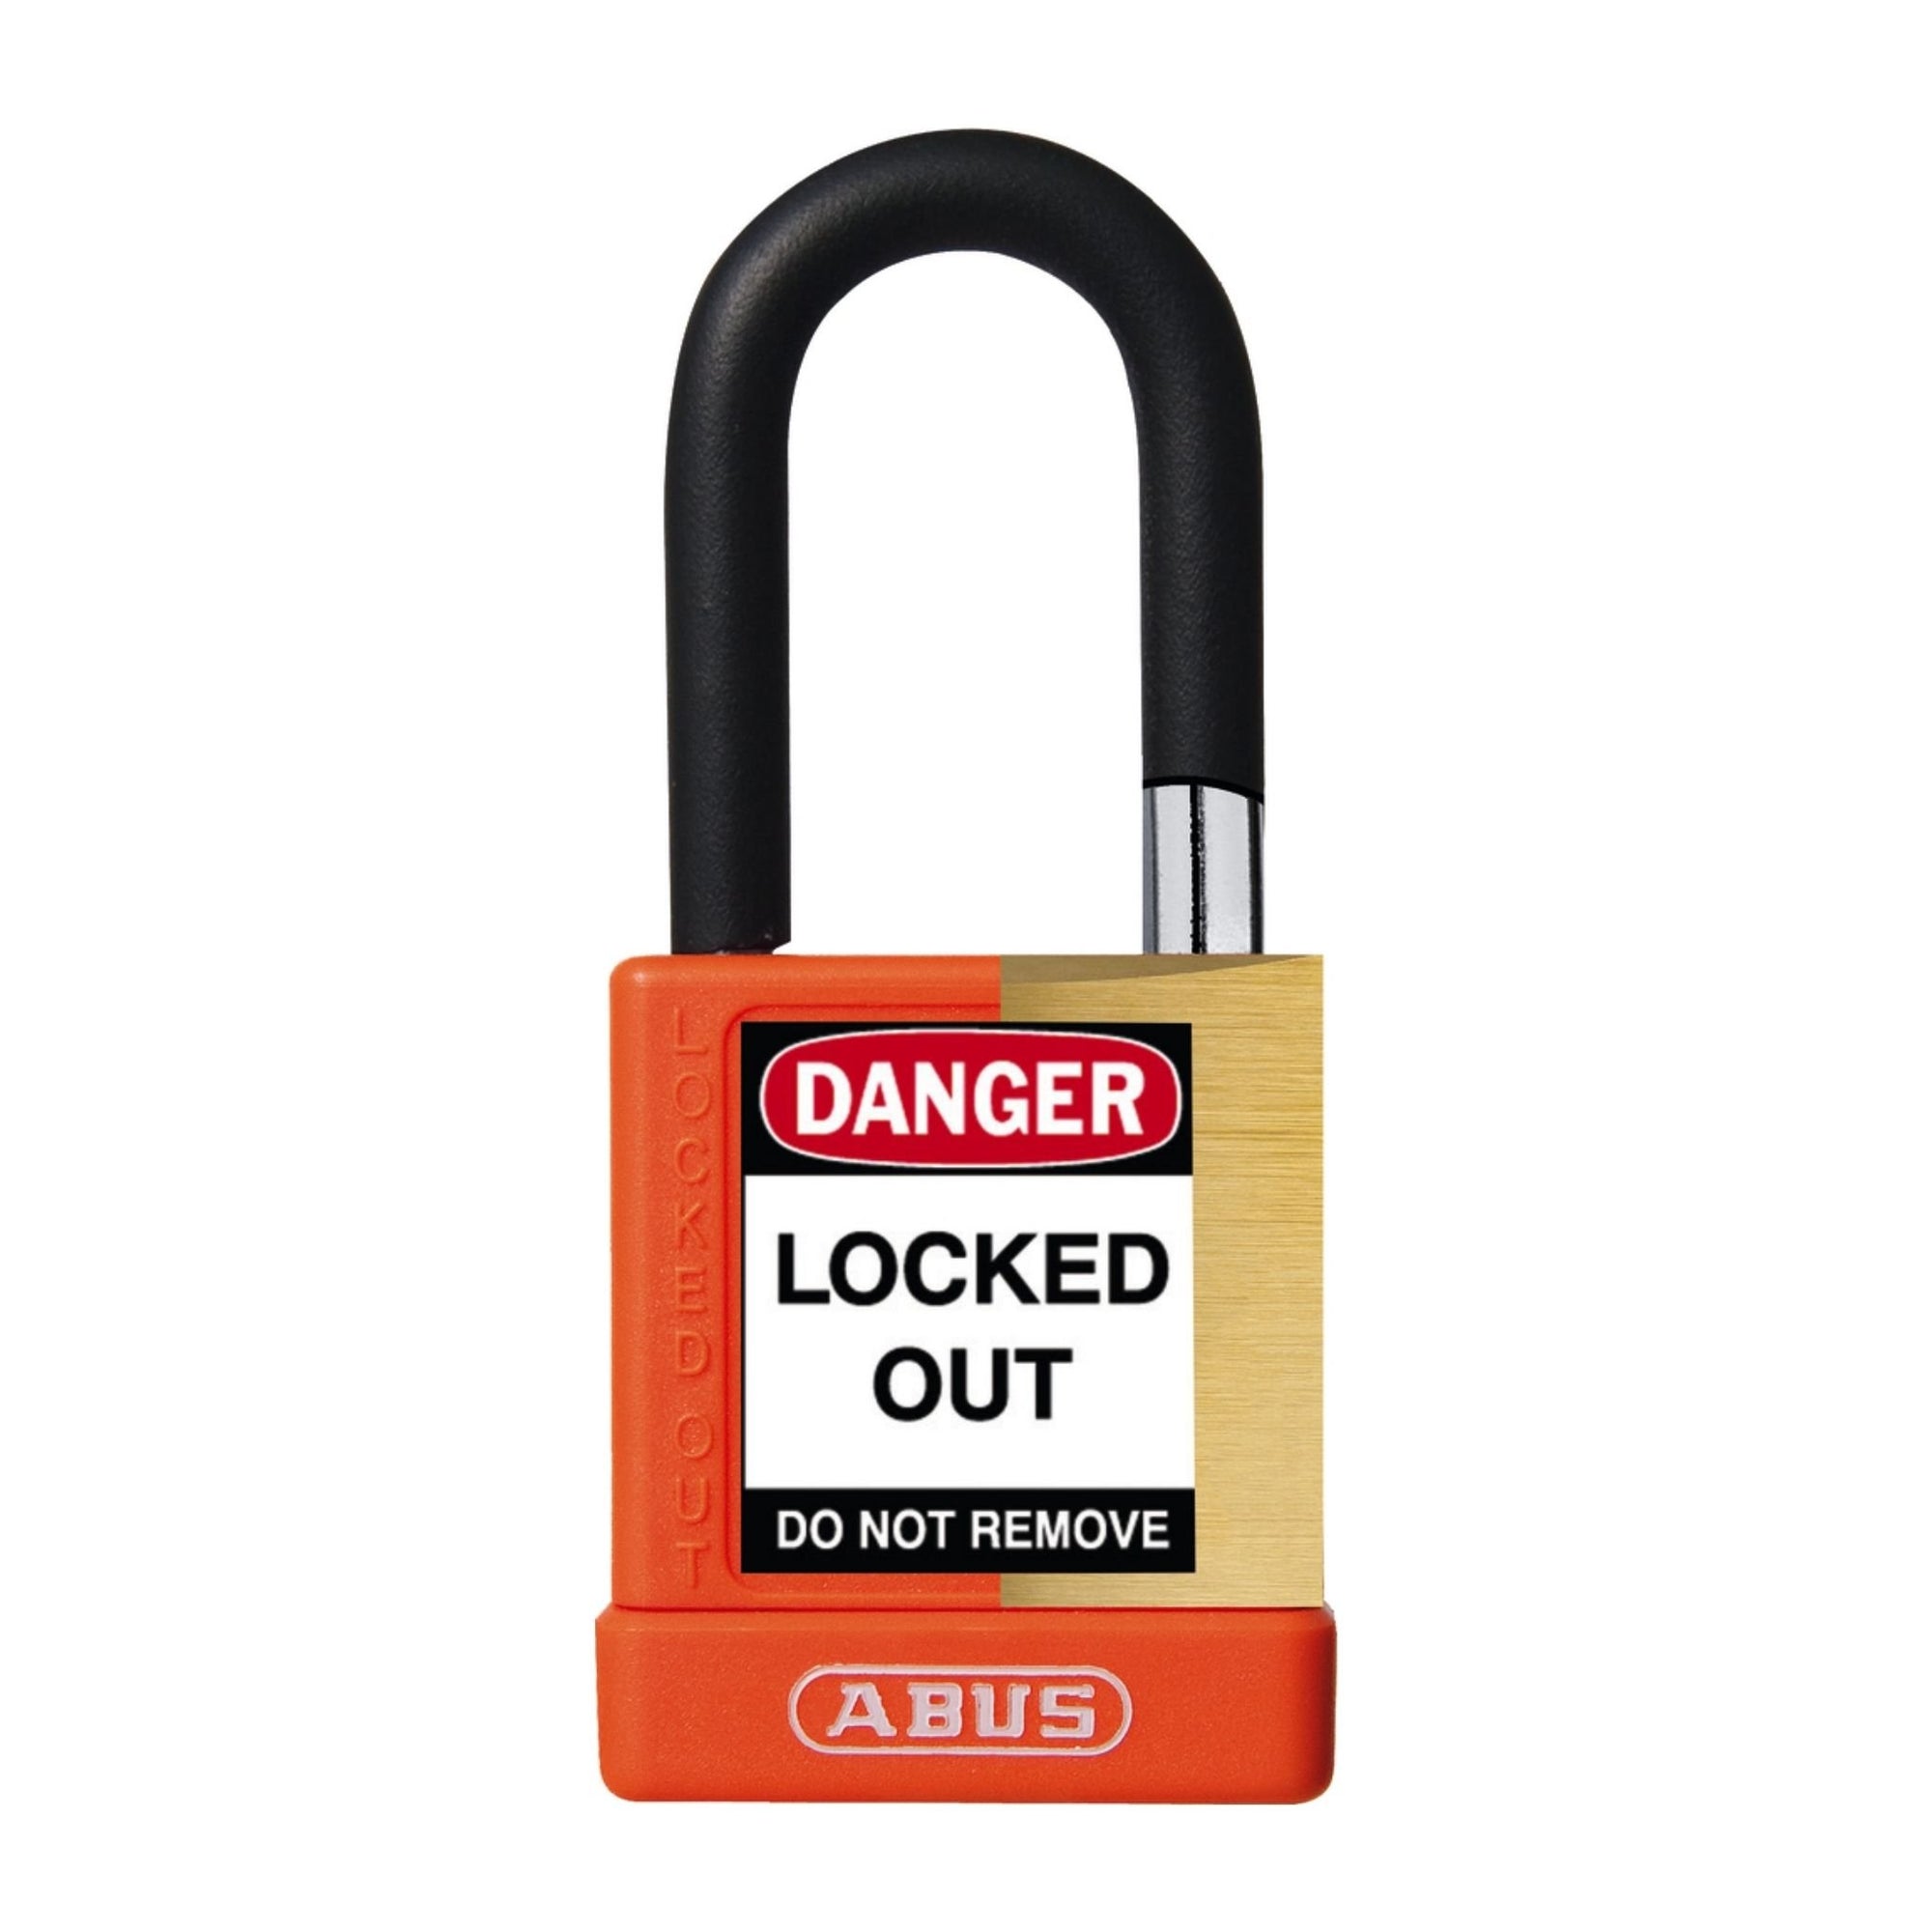 Abus 74M/40 KD Orange Insulated Brass Safety Padlock with 1-1/2" Shackle - The Lock Source